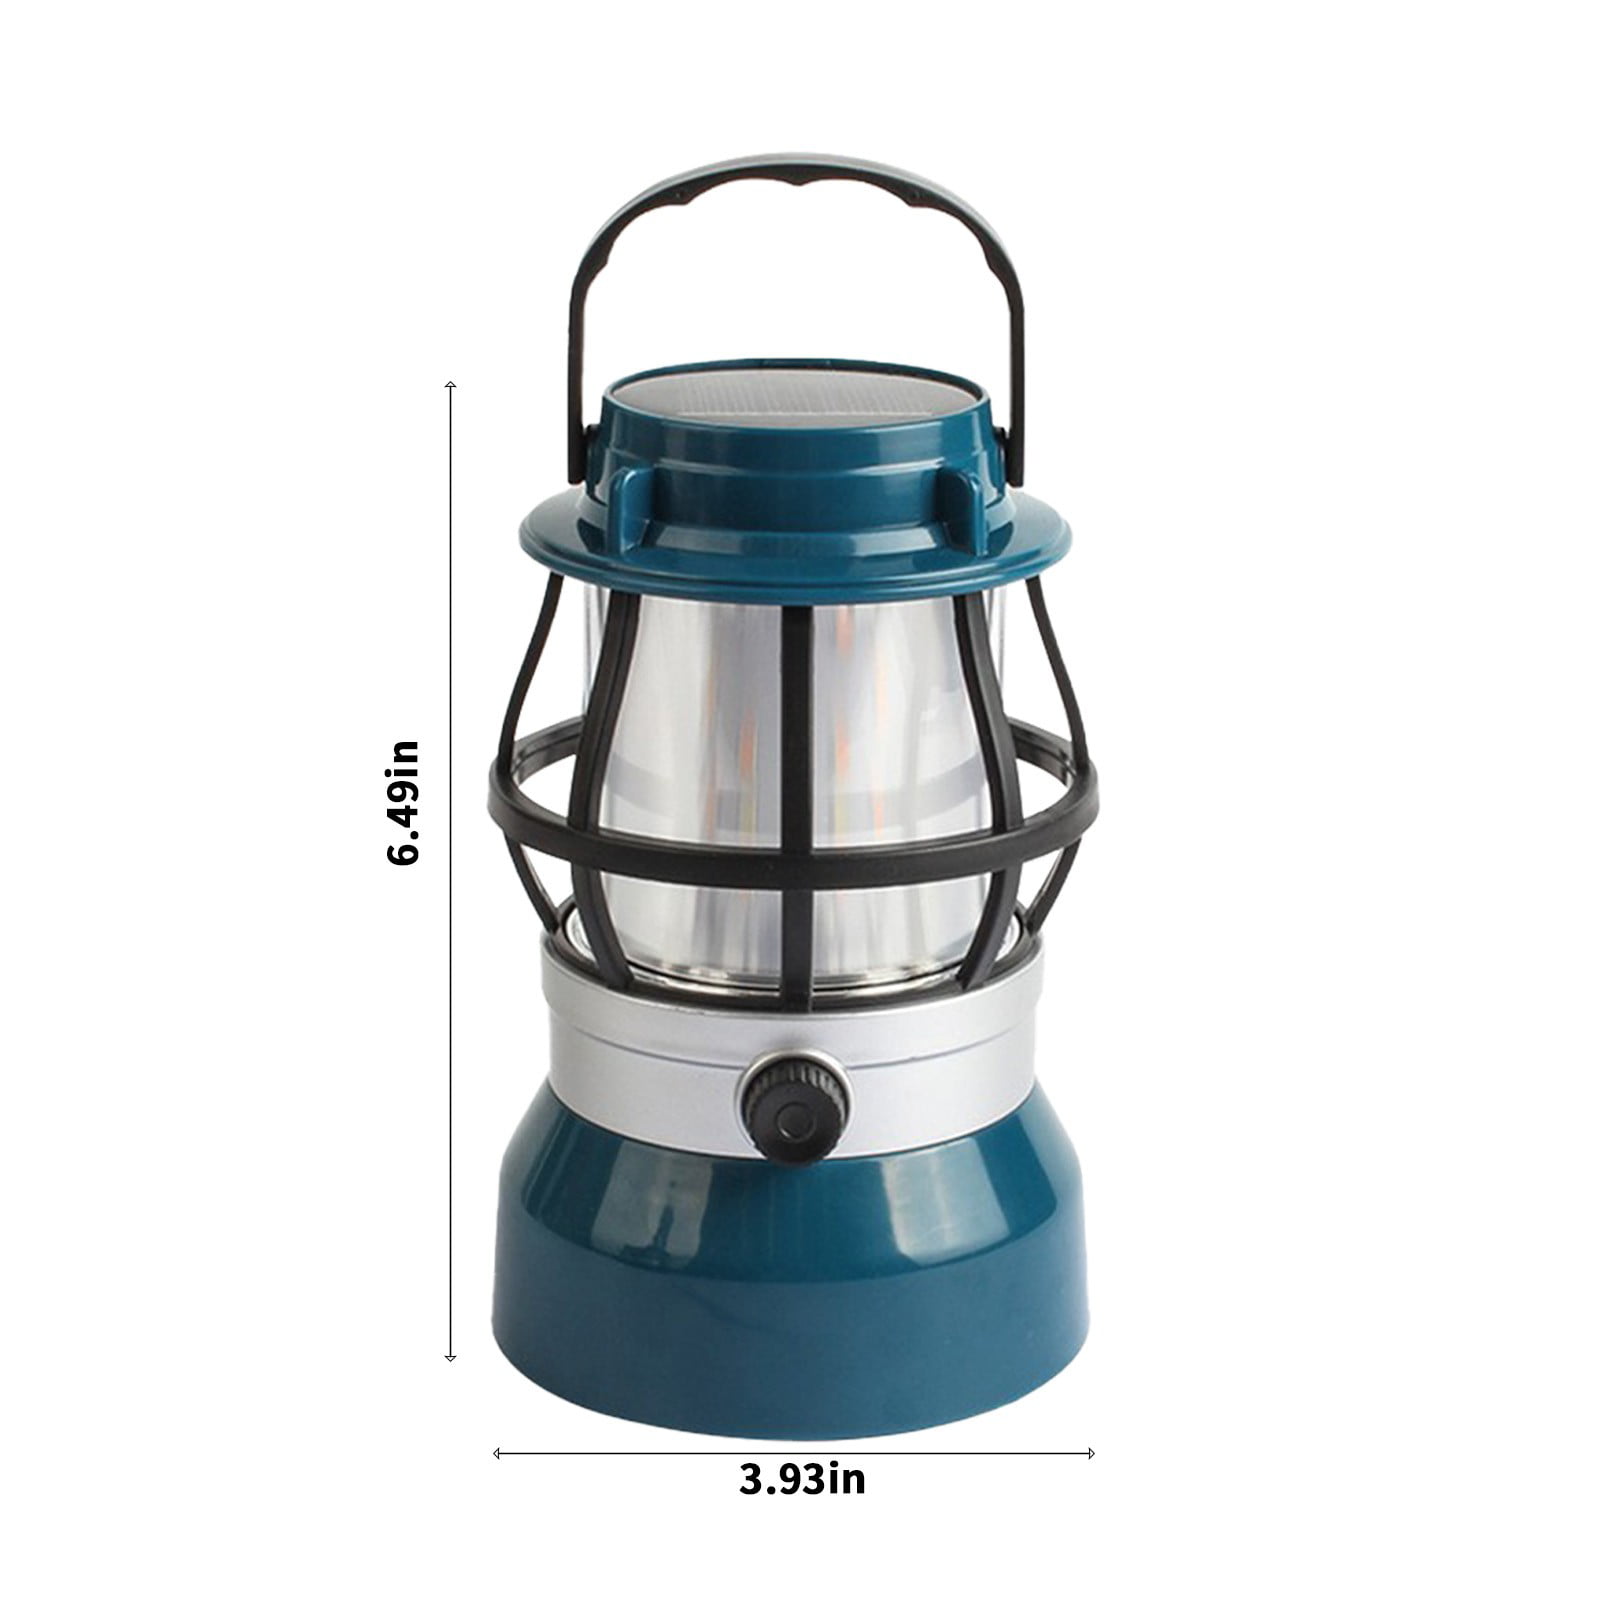 Outask Telescopic Lantern All Terrain Outdoor Multifunctional Camping Light  Charging Treasure Phone Travel Emergency Tent Lamps